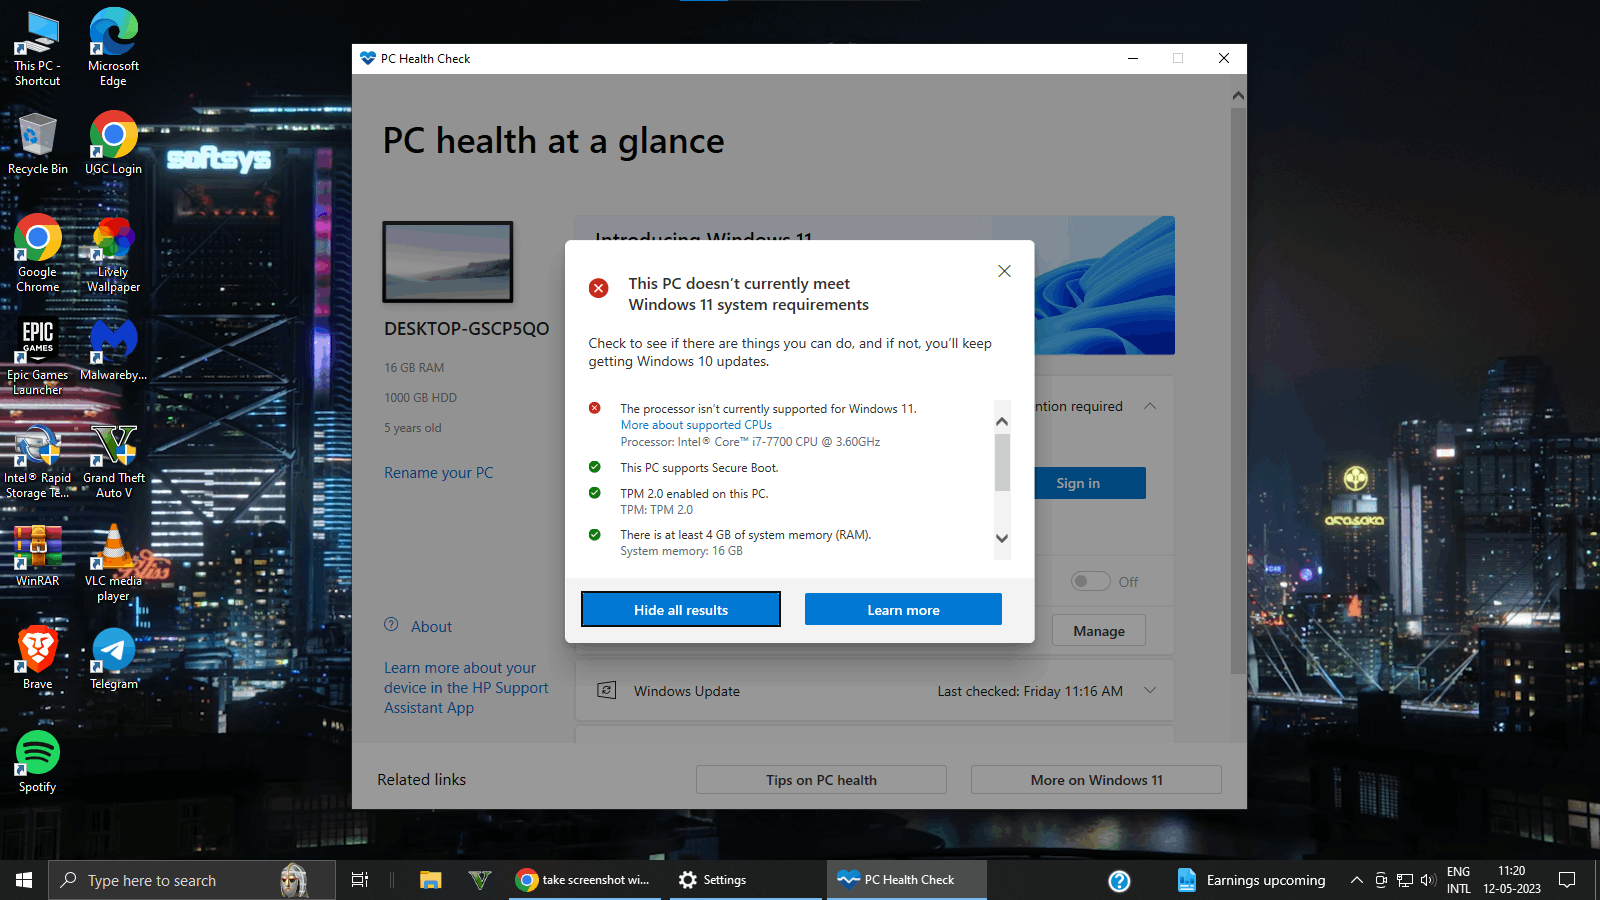 Not sure if your PC is compatible with Windows 11? Here's how to